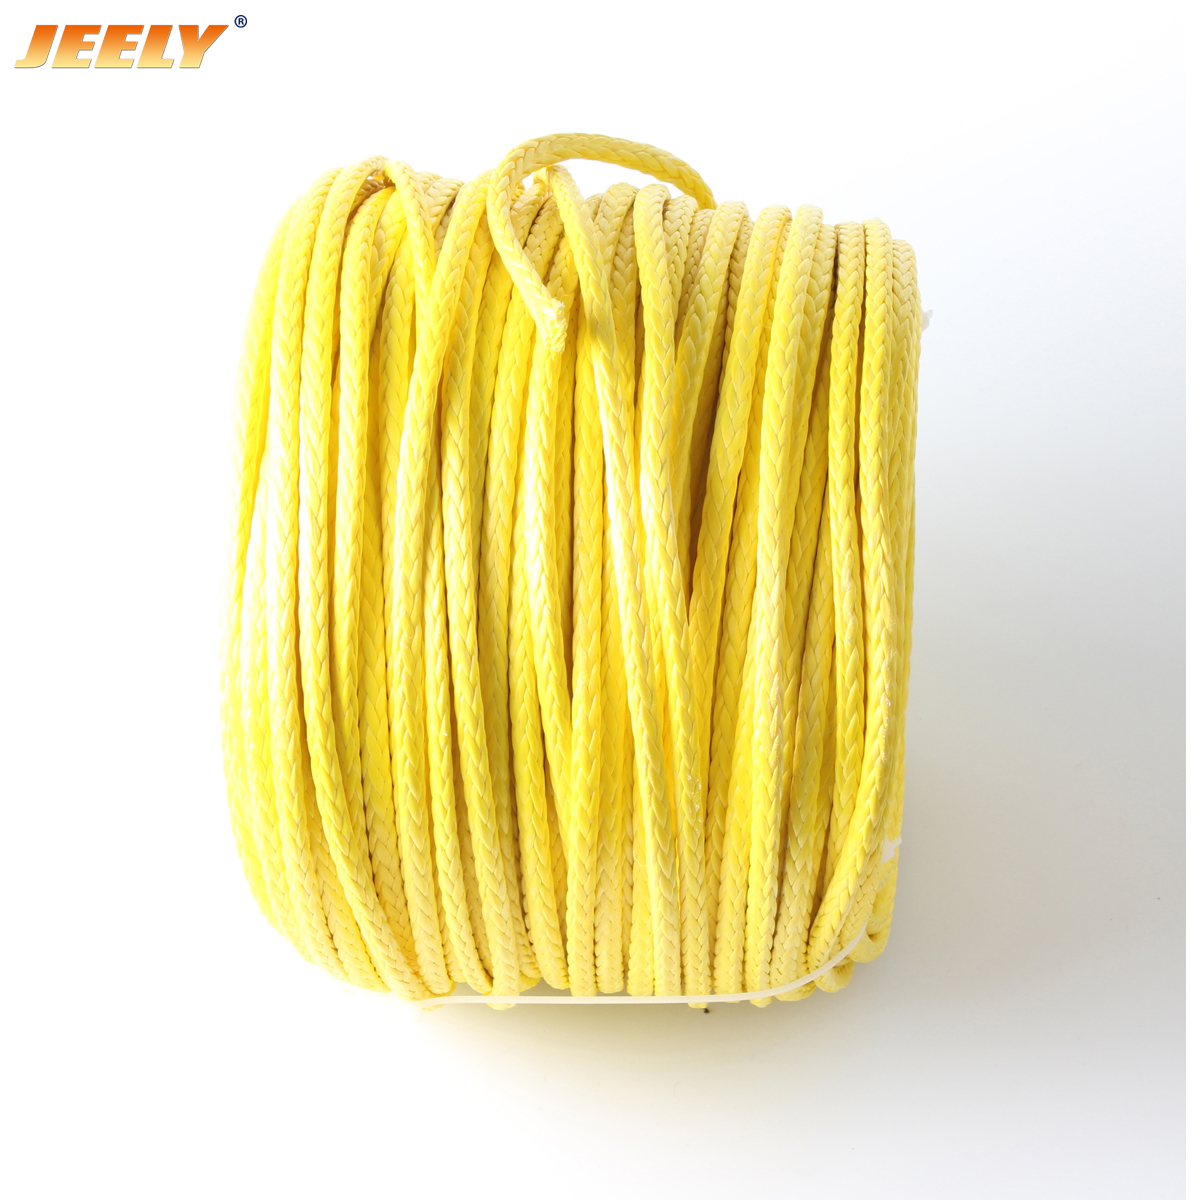 7mm ATV UTV offroad UHMWPE synthetic winch rope